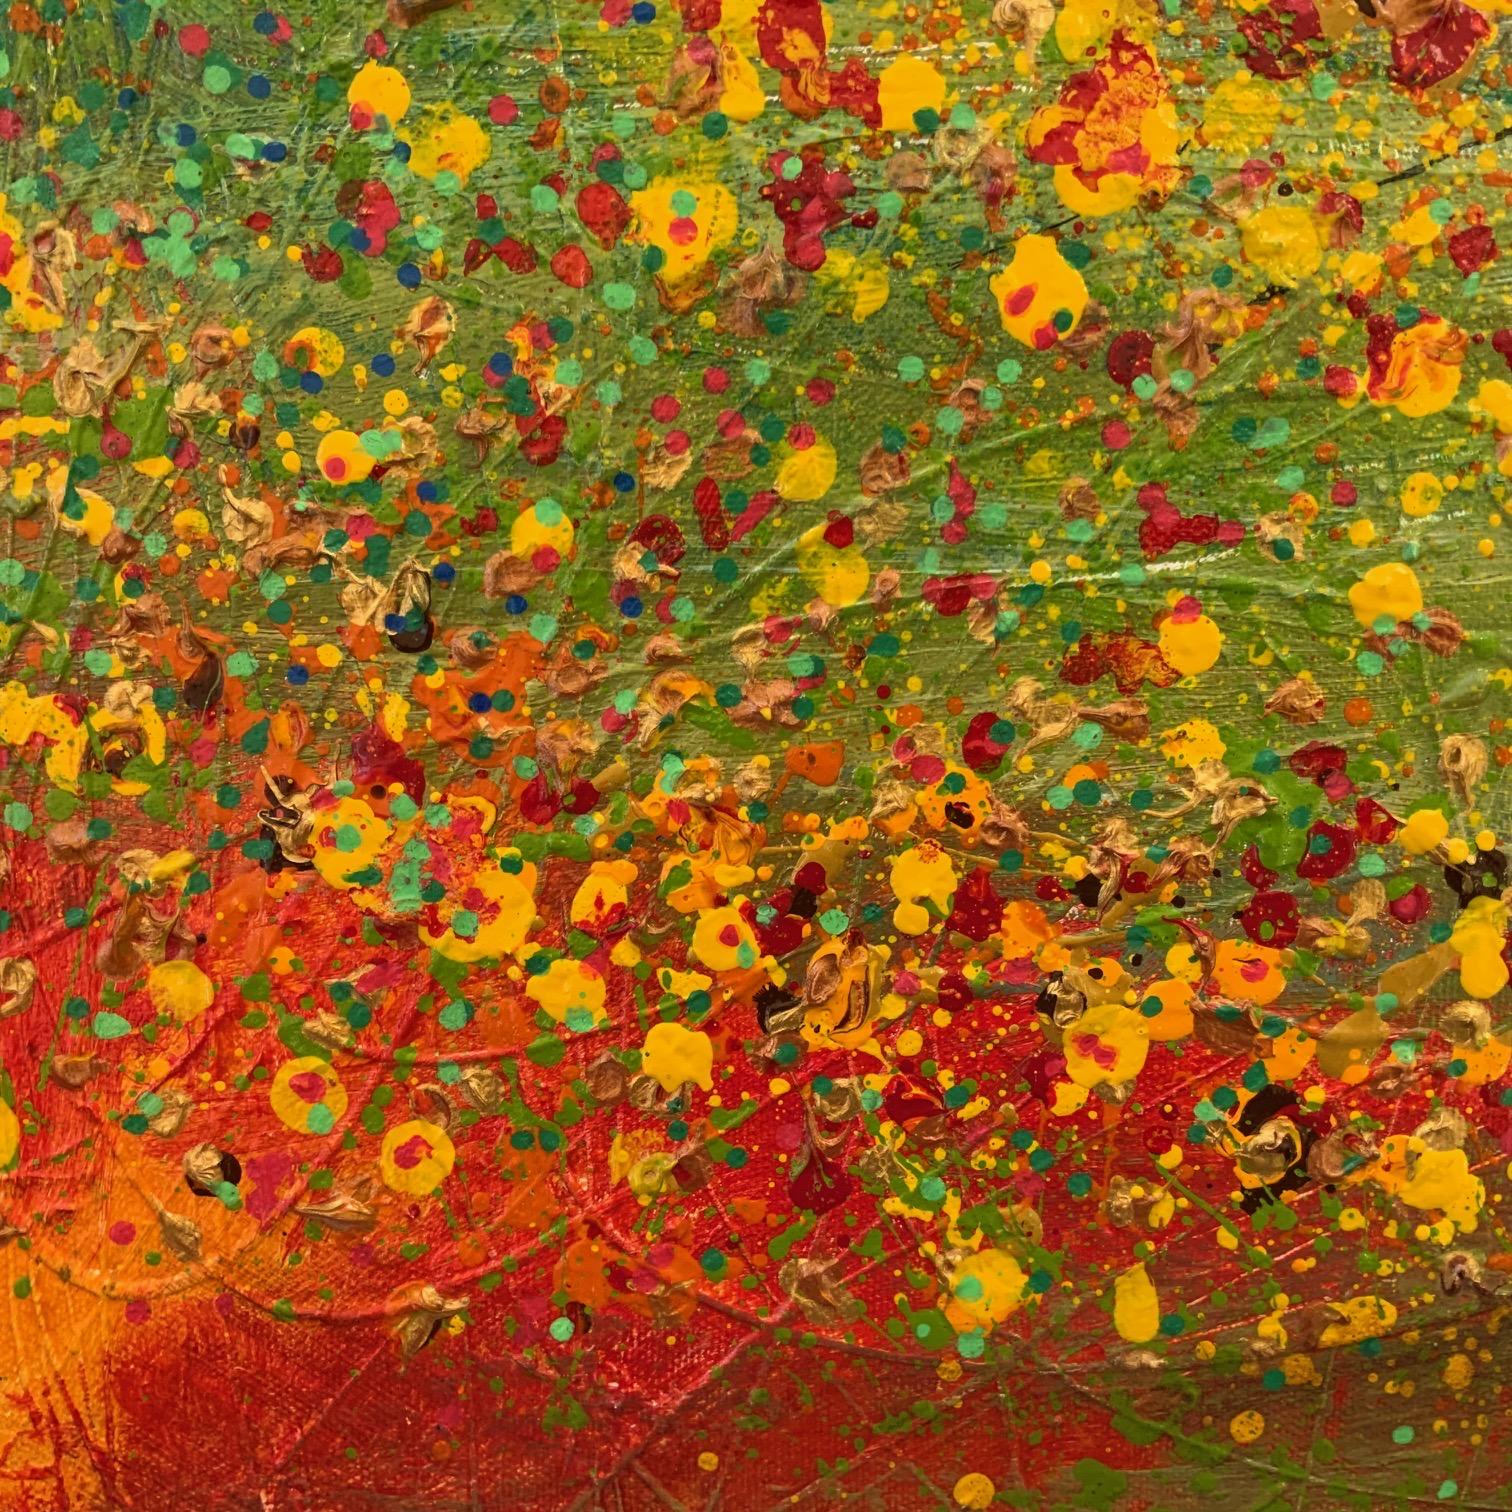 Abstract Autumnal Blossom, Jan Rogers, Bright Landscape Painting, Tree Art 2